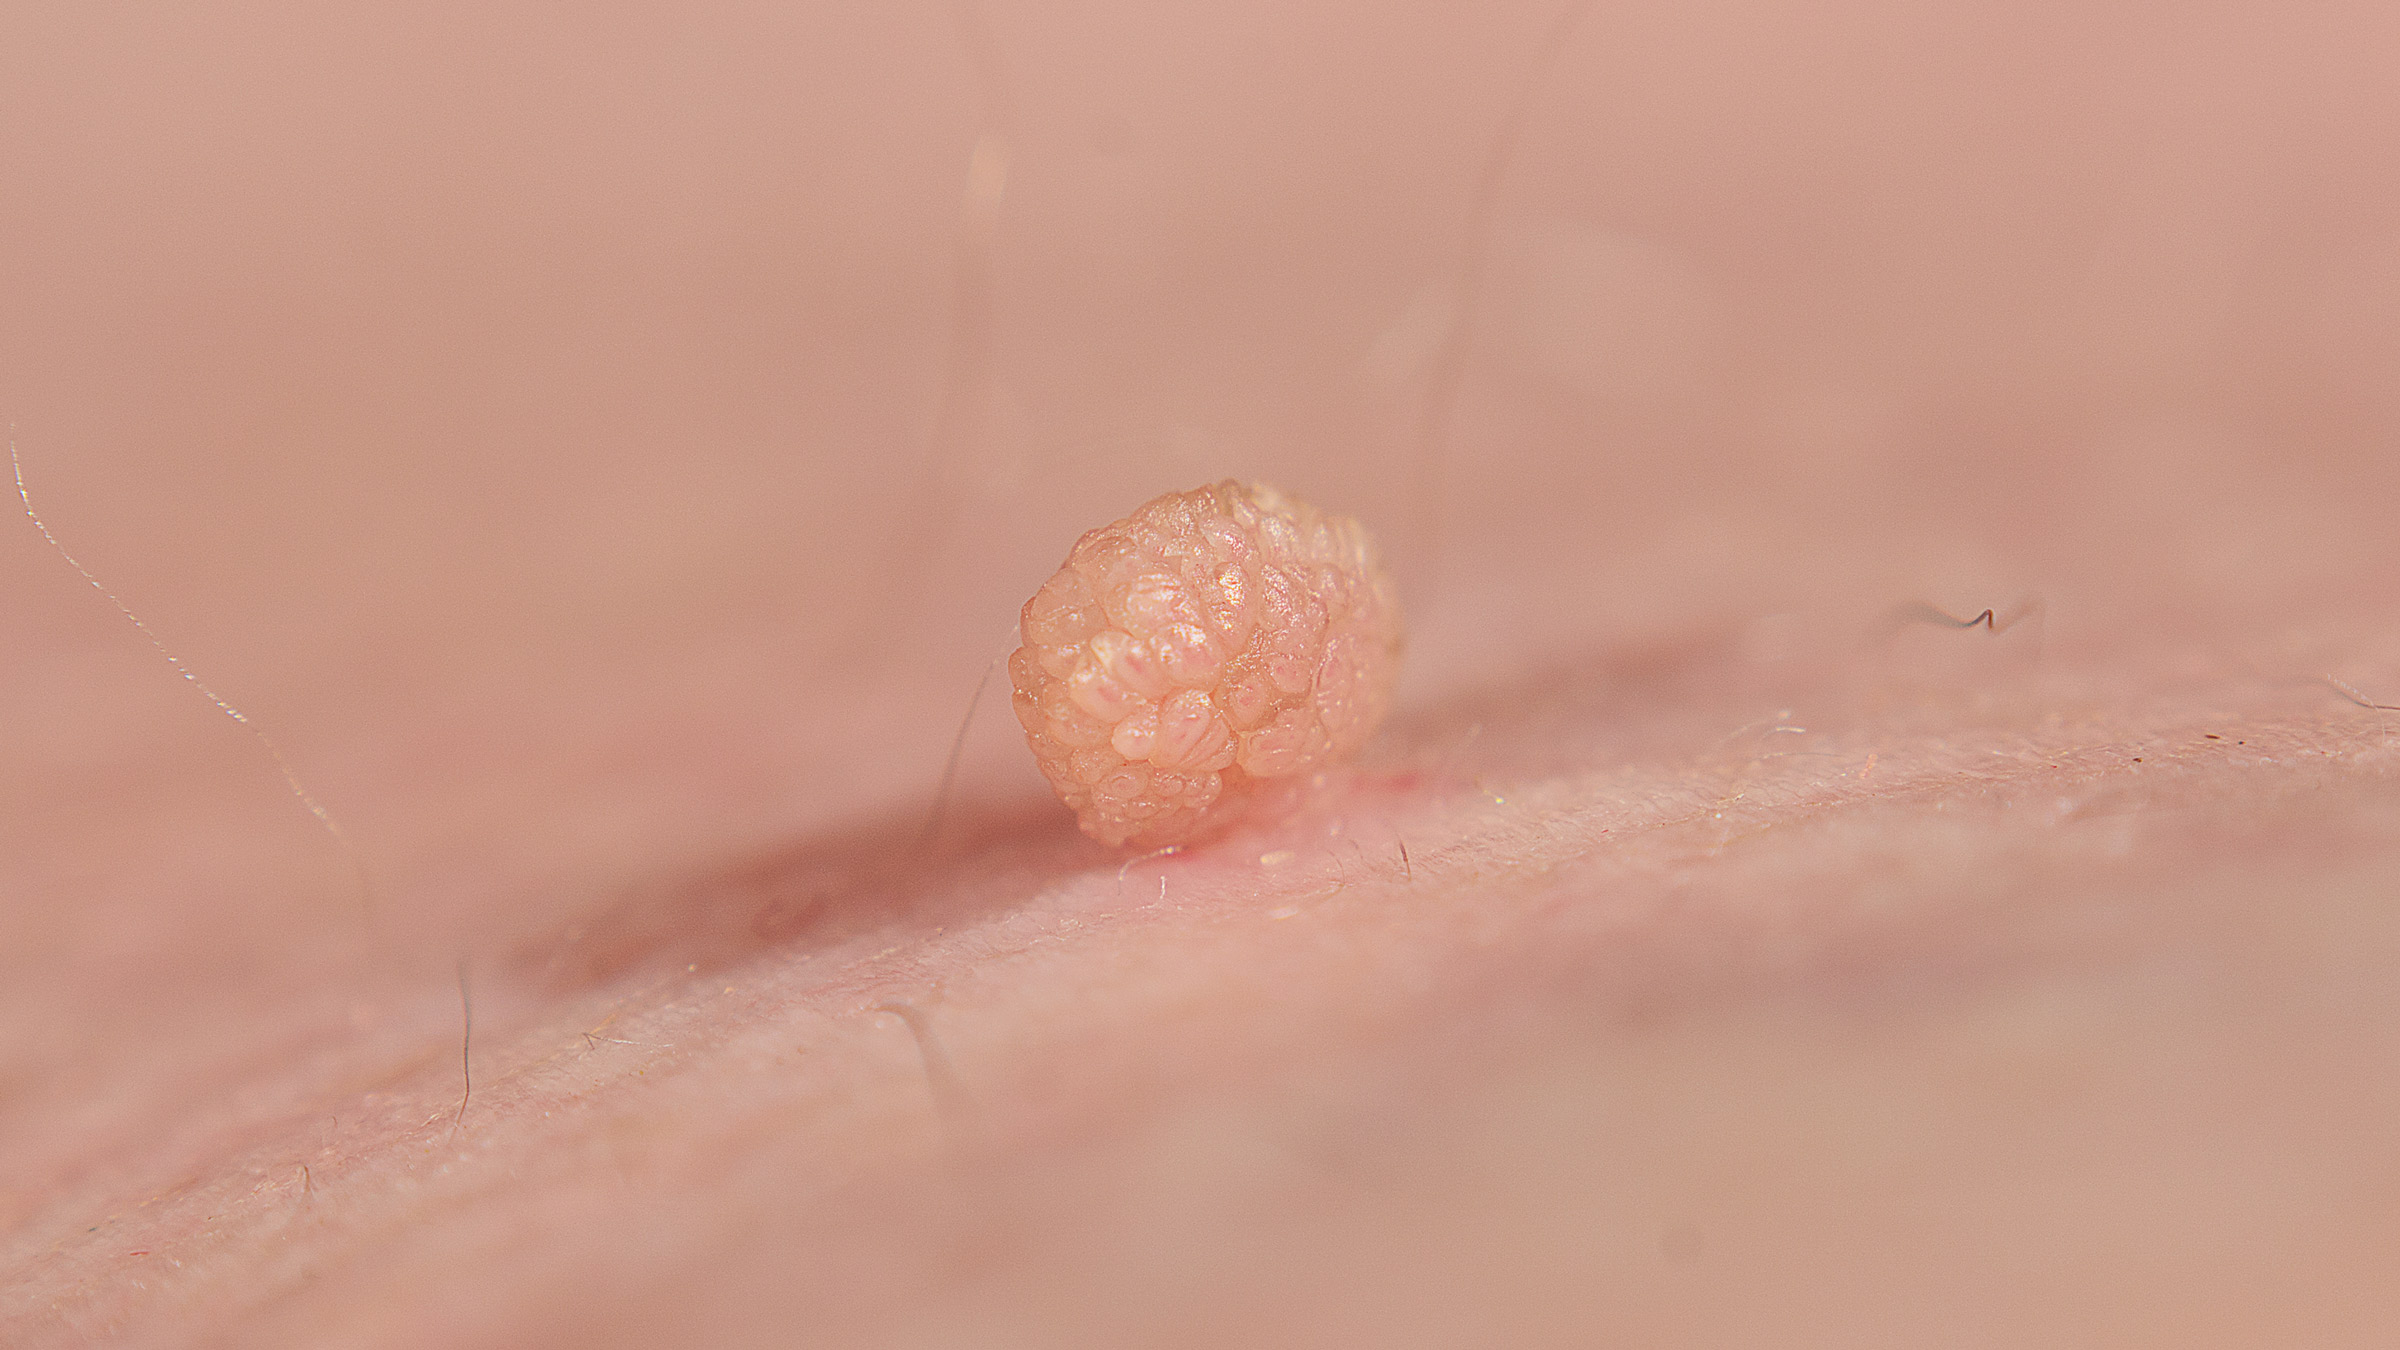 What Are Skin Tags, and How Are Skin Tags Removed? - GoodRx